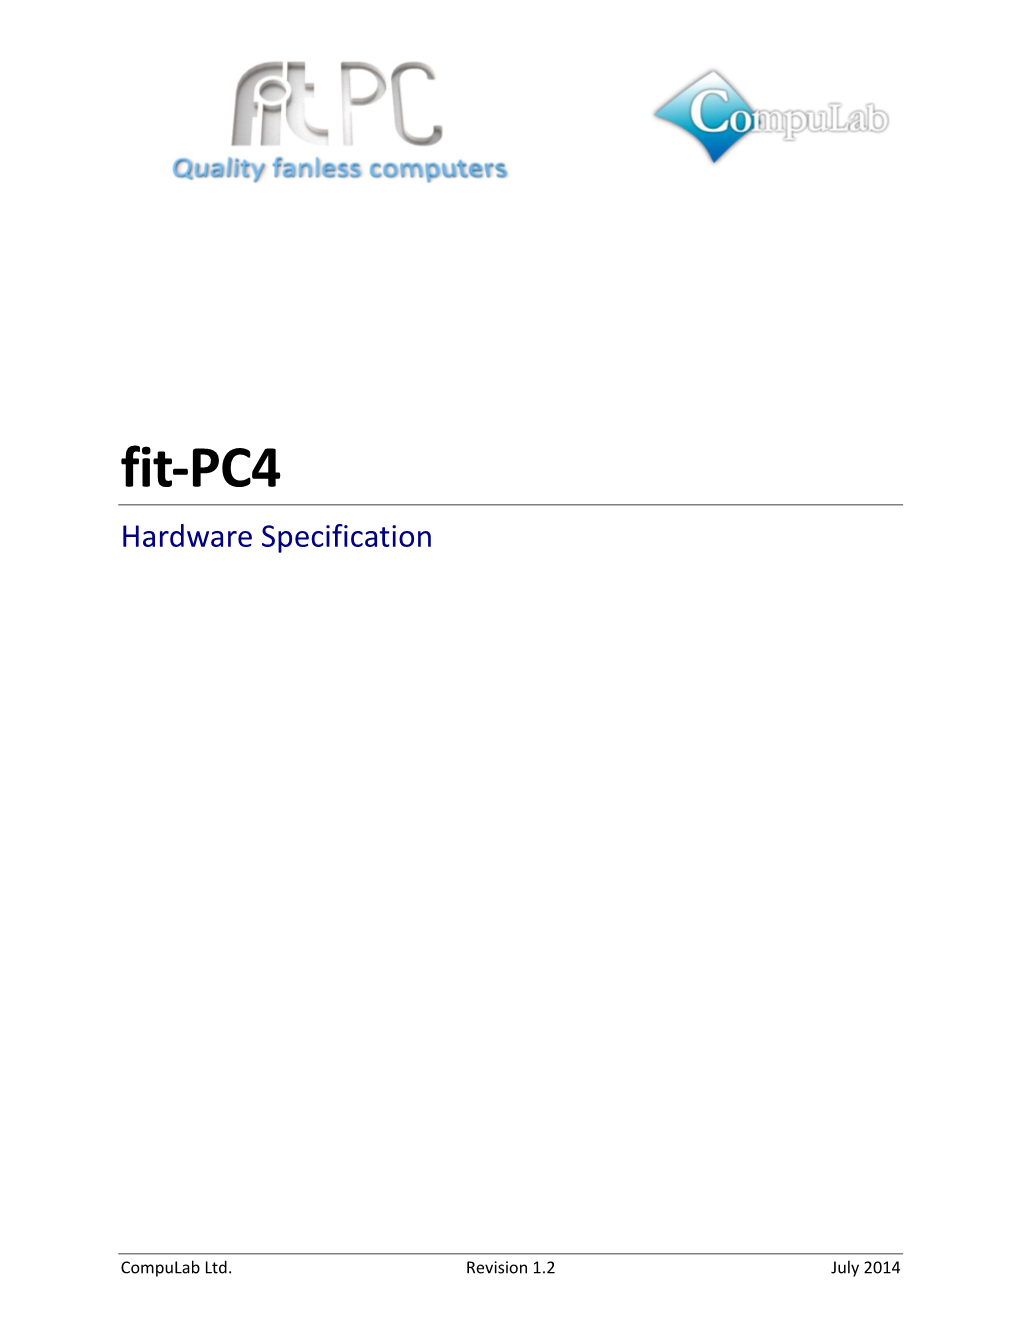 Fit-PC4 Hardware Specification